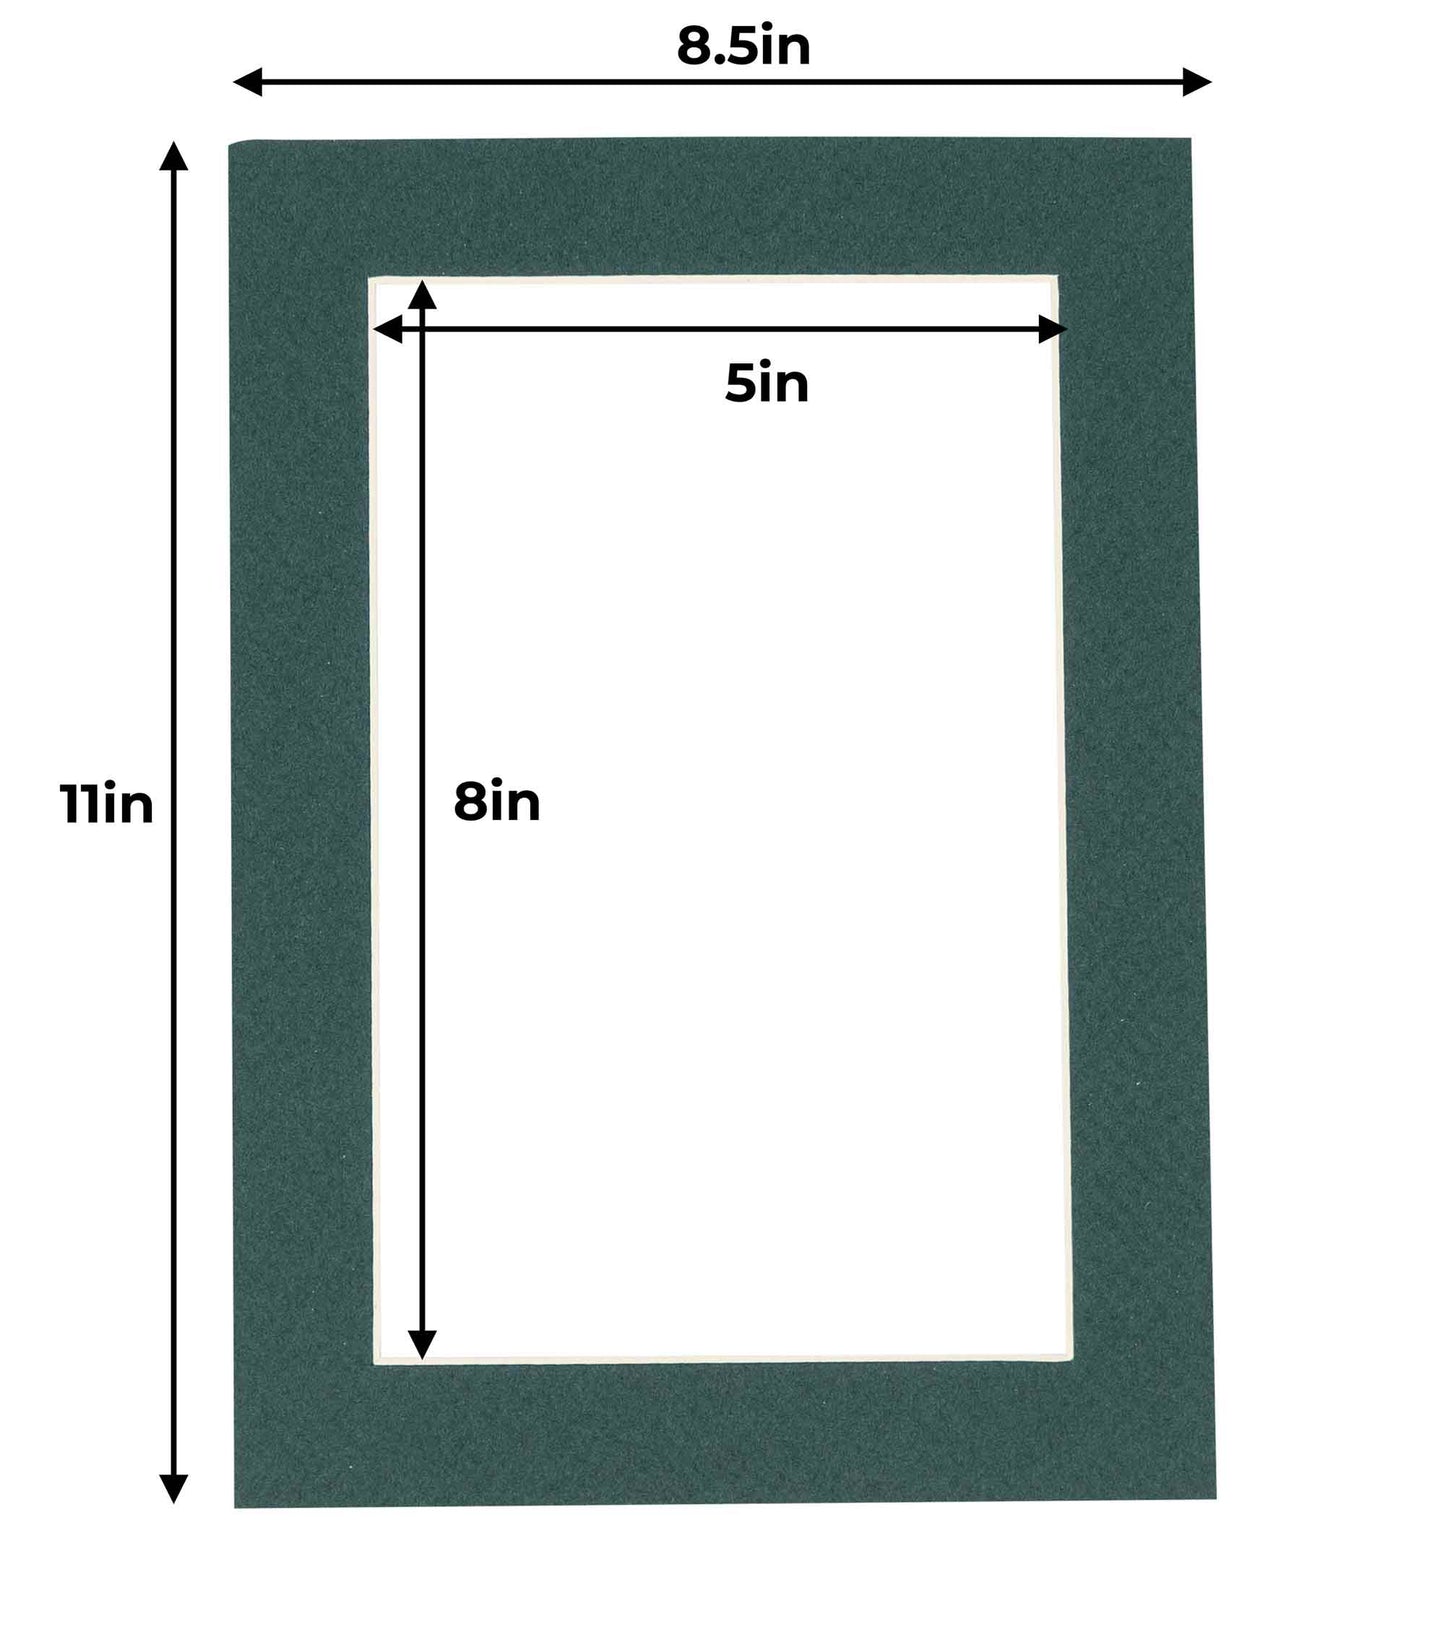 Pack of 25 Forest Green Precut Acid-Free Matboards